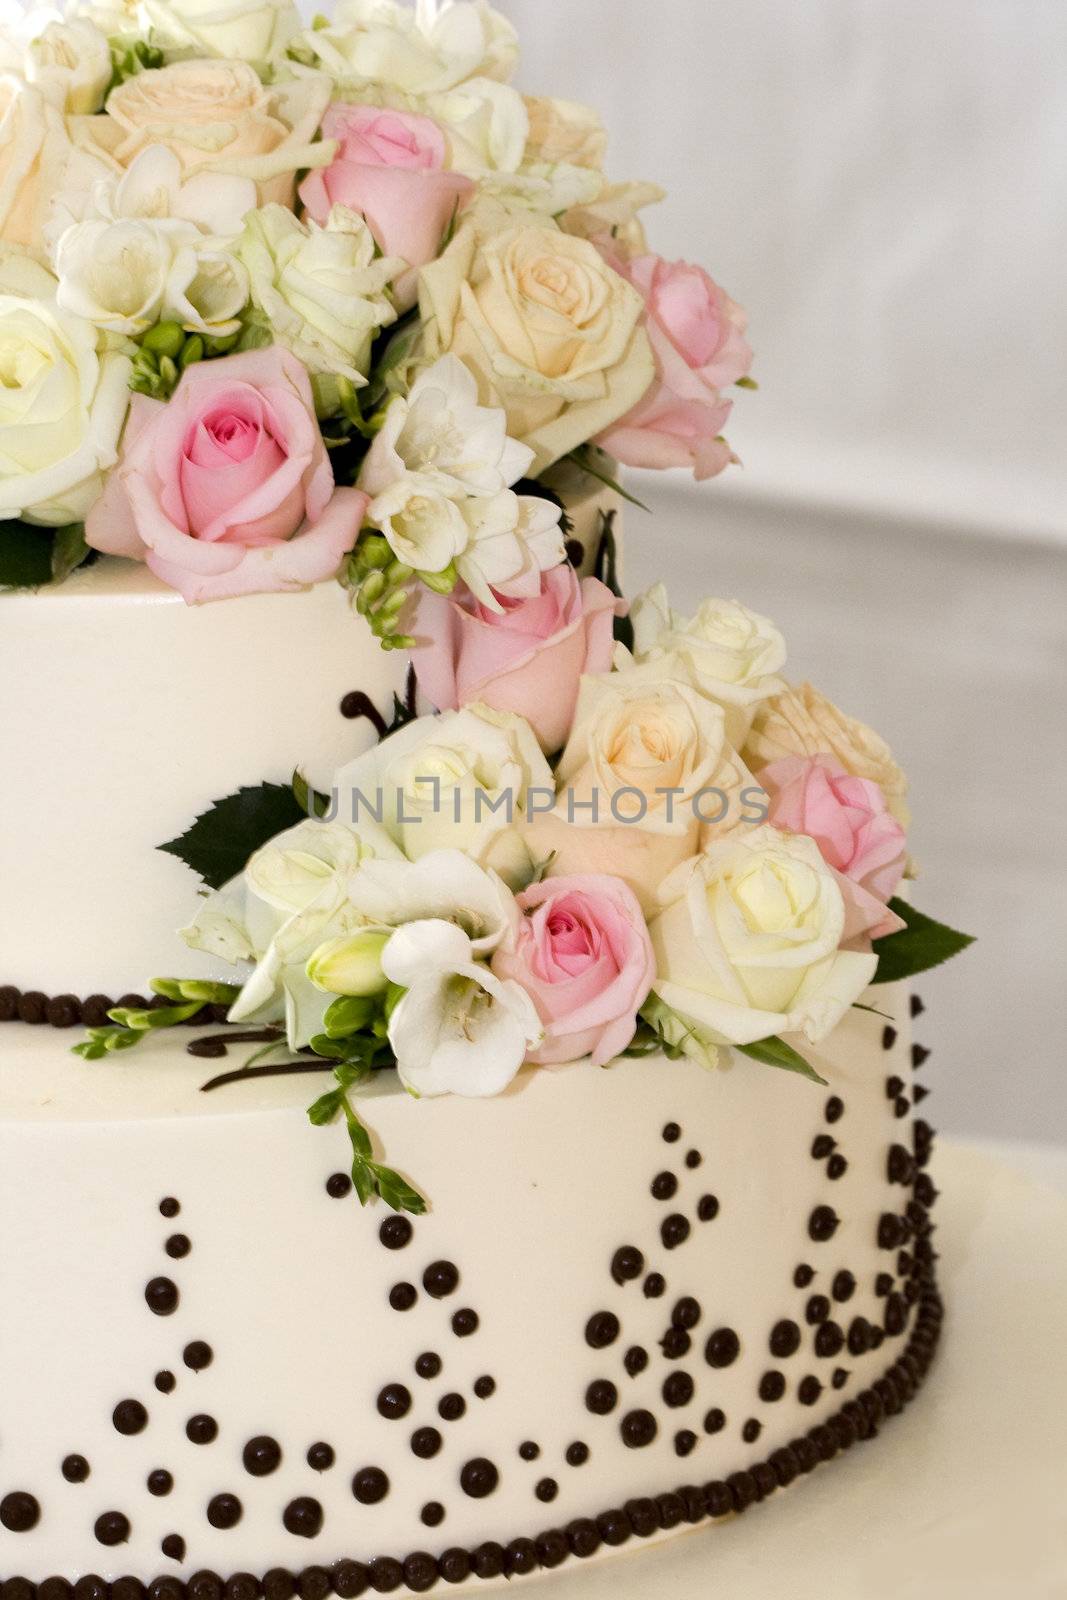 Tiered wedding cake  by LWPhotog